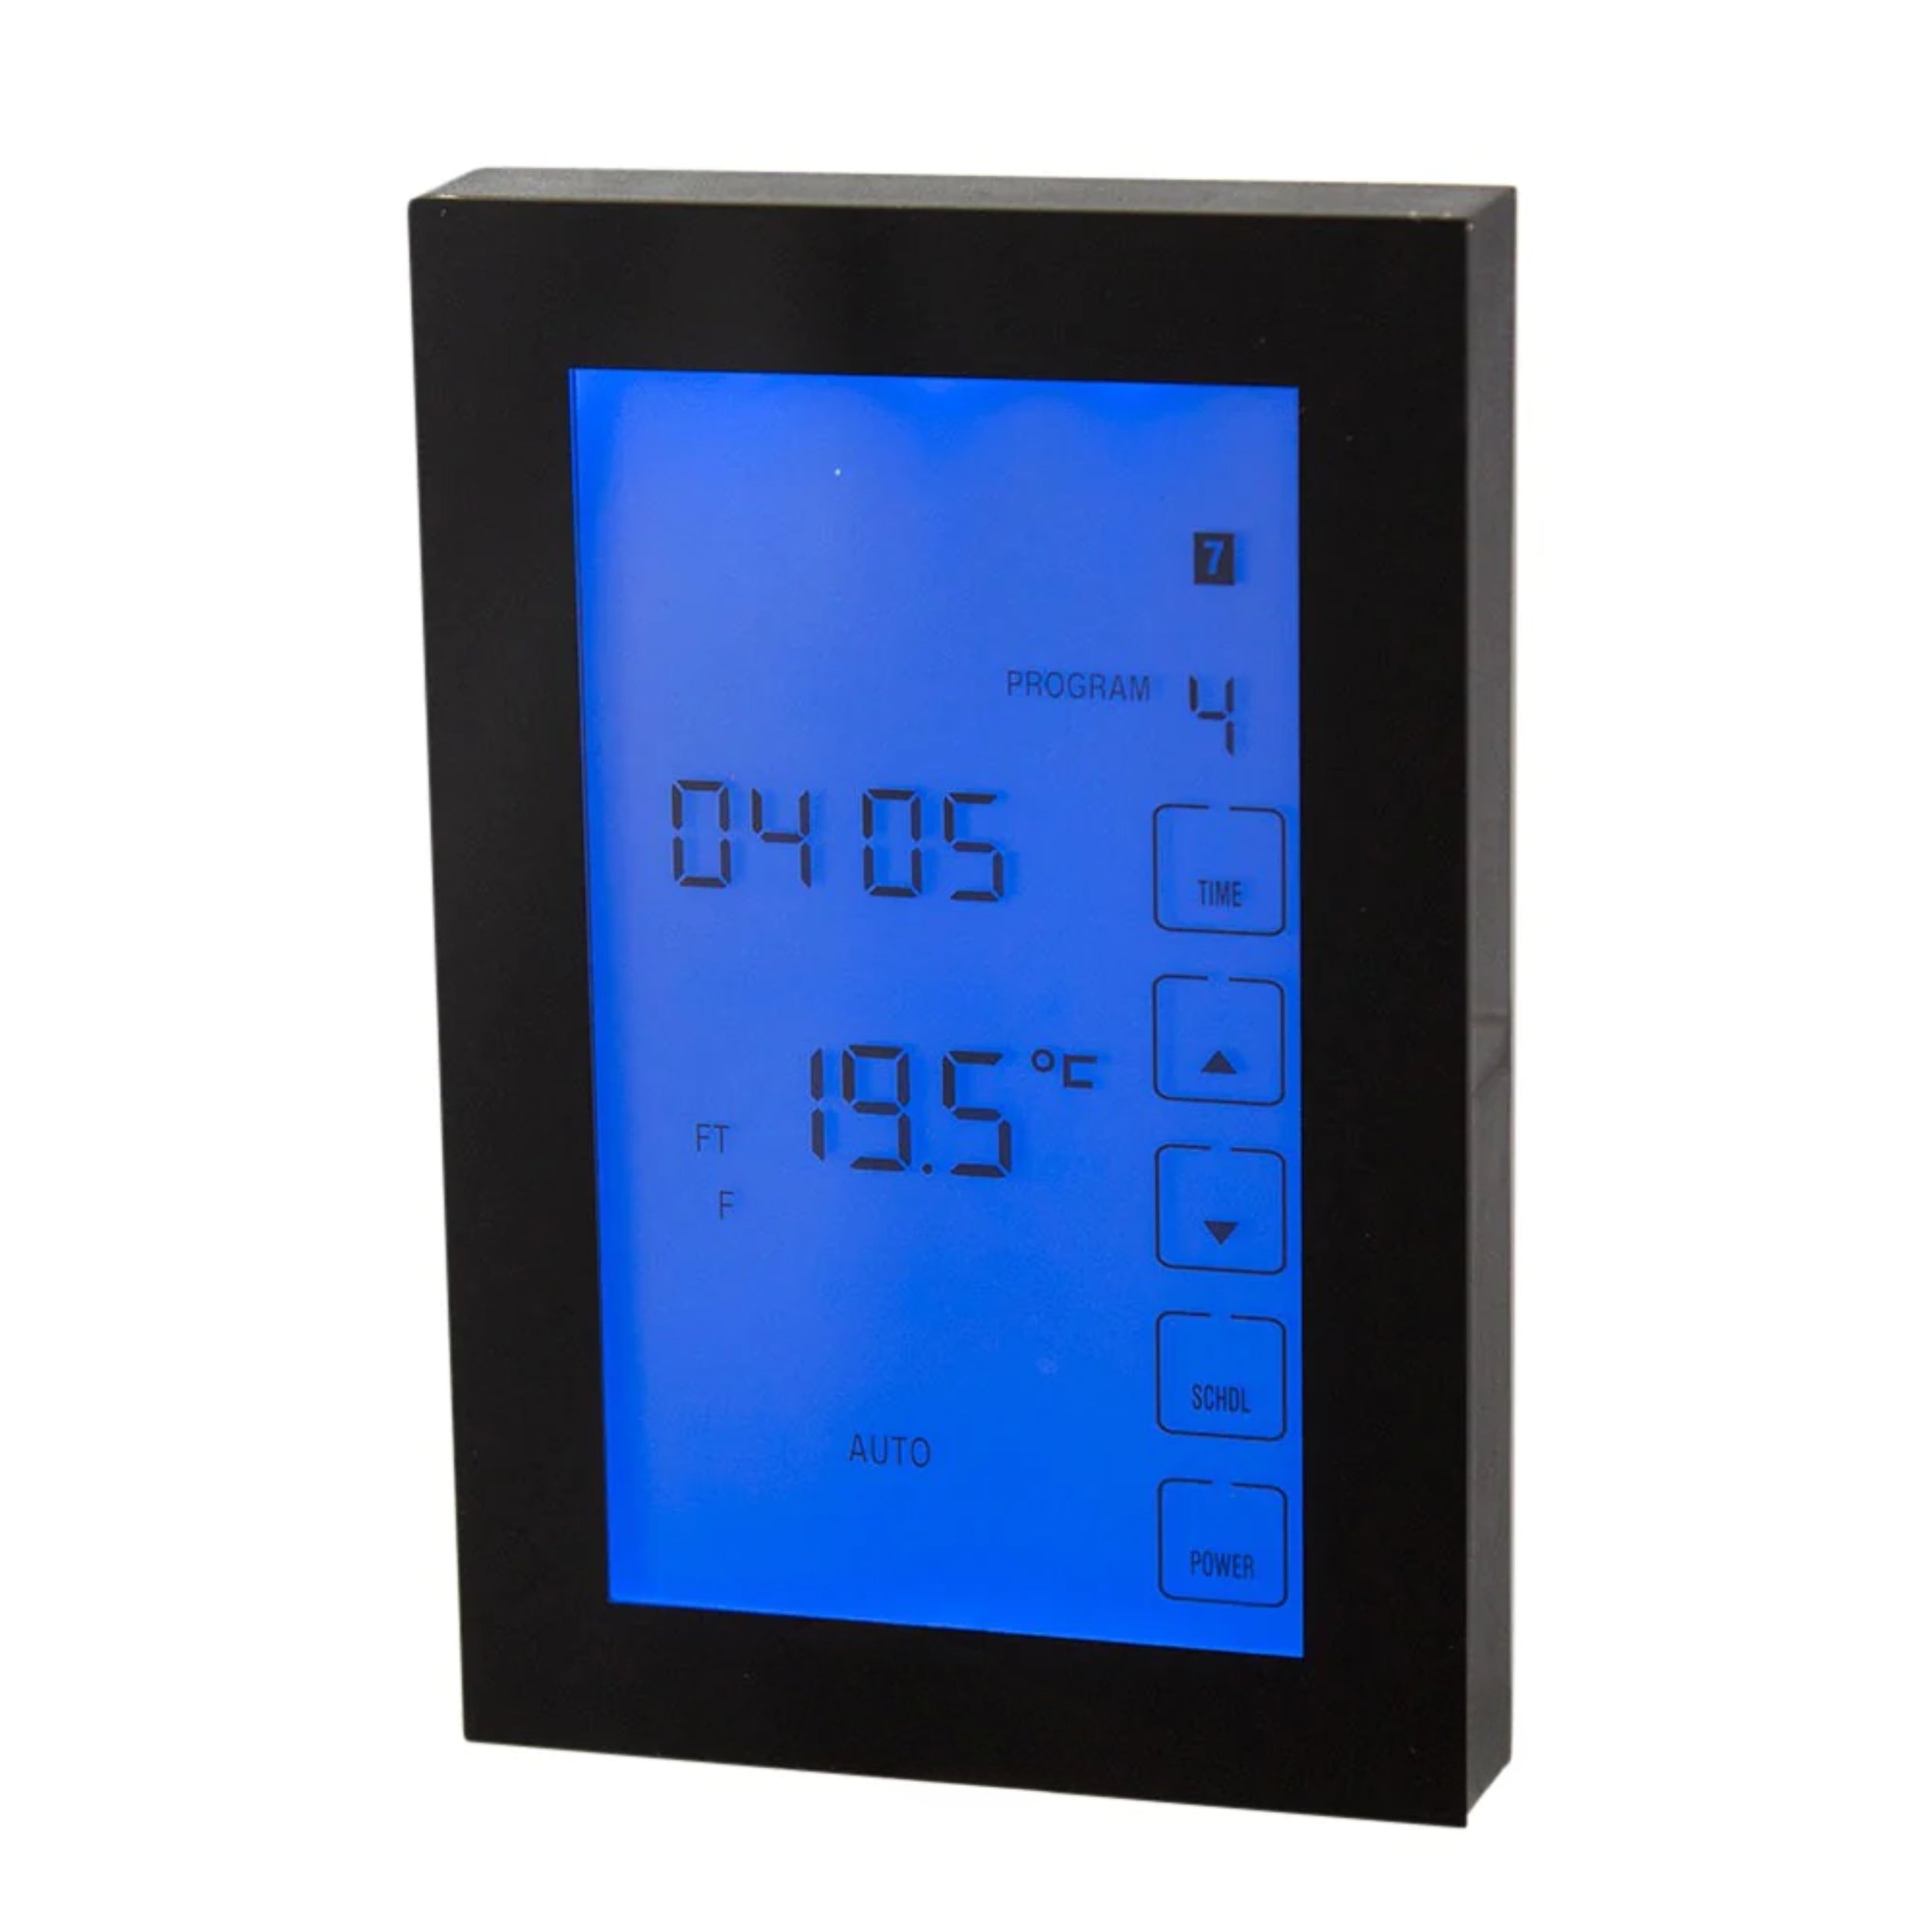 RADIANT HEATING GLASS FRONTED TOUCH SCREEN THERMOSTAT VERTICAL MOUNTED BLACK 120MM